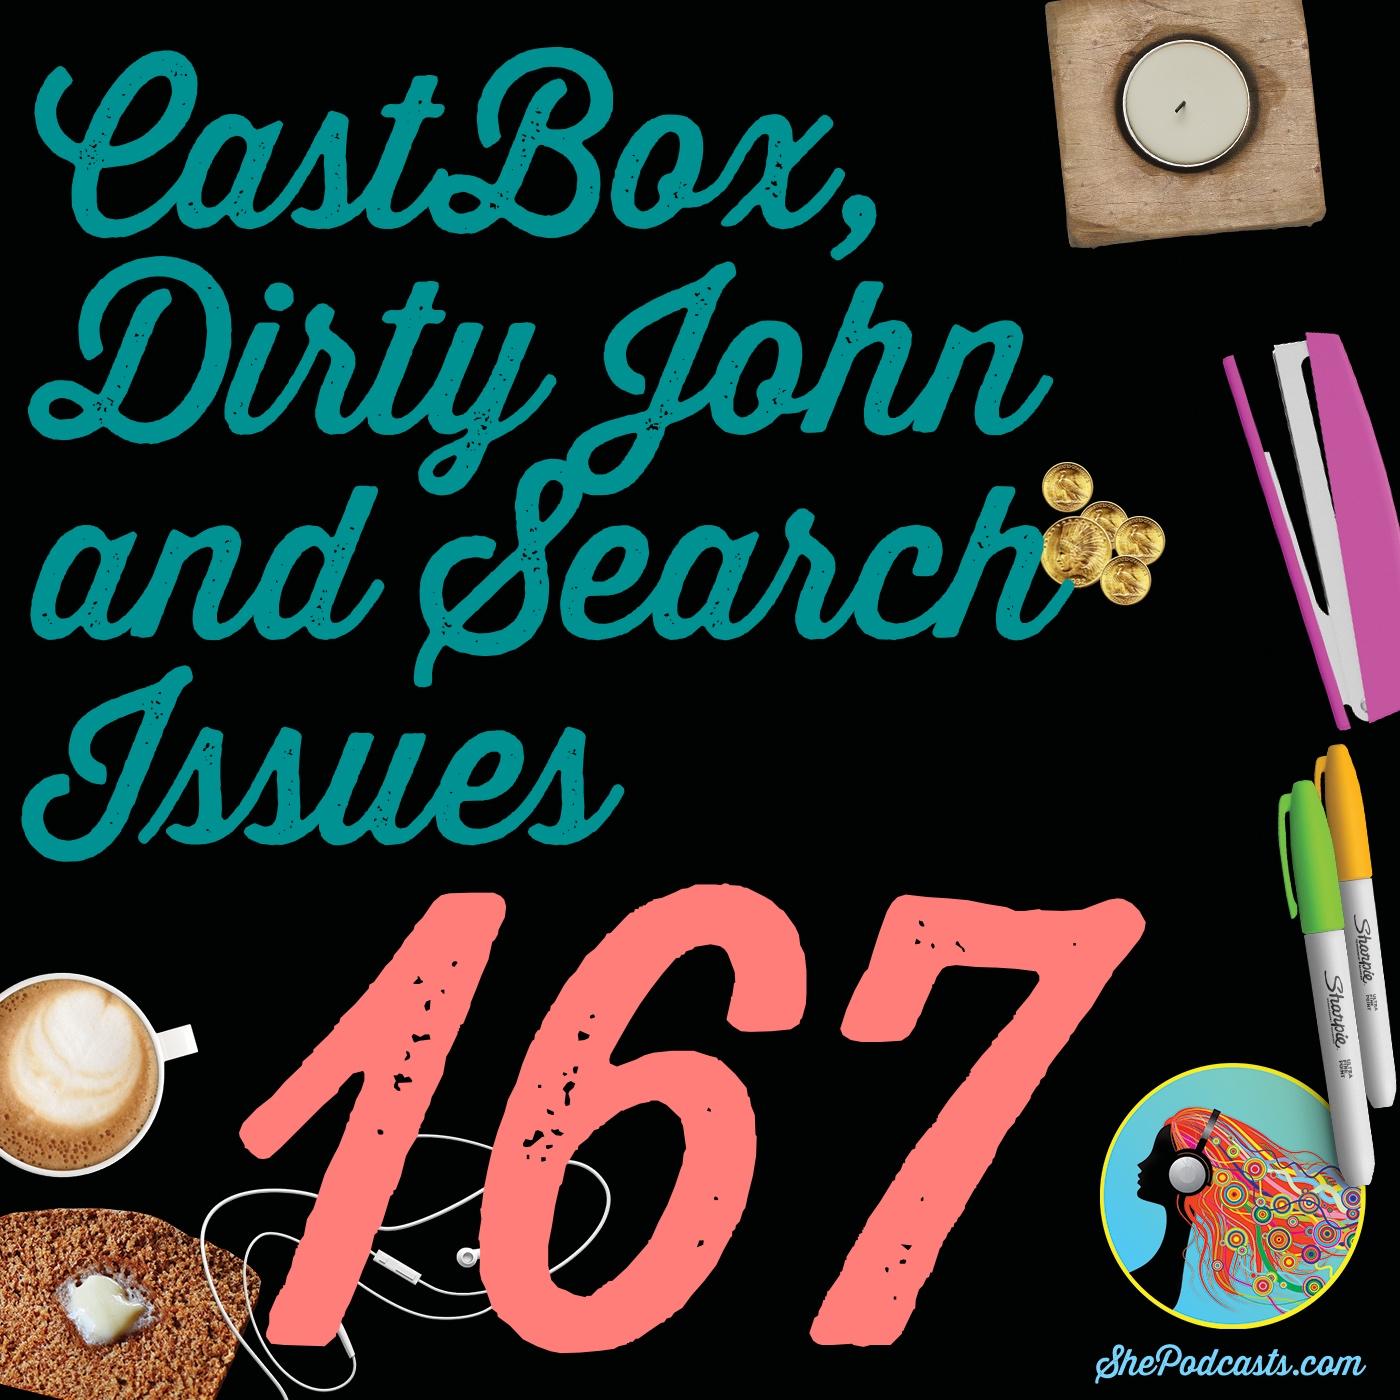 167 CastBox, Dirty John and Search Issues